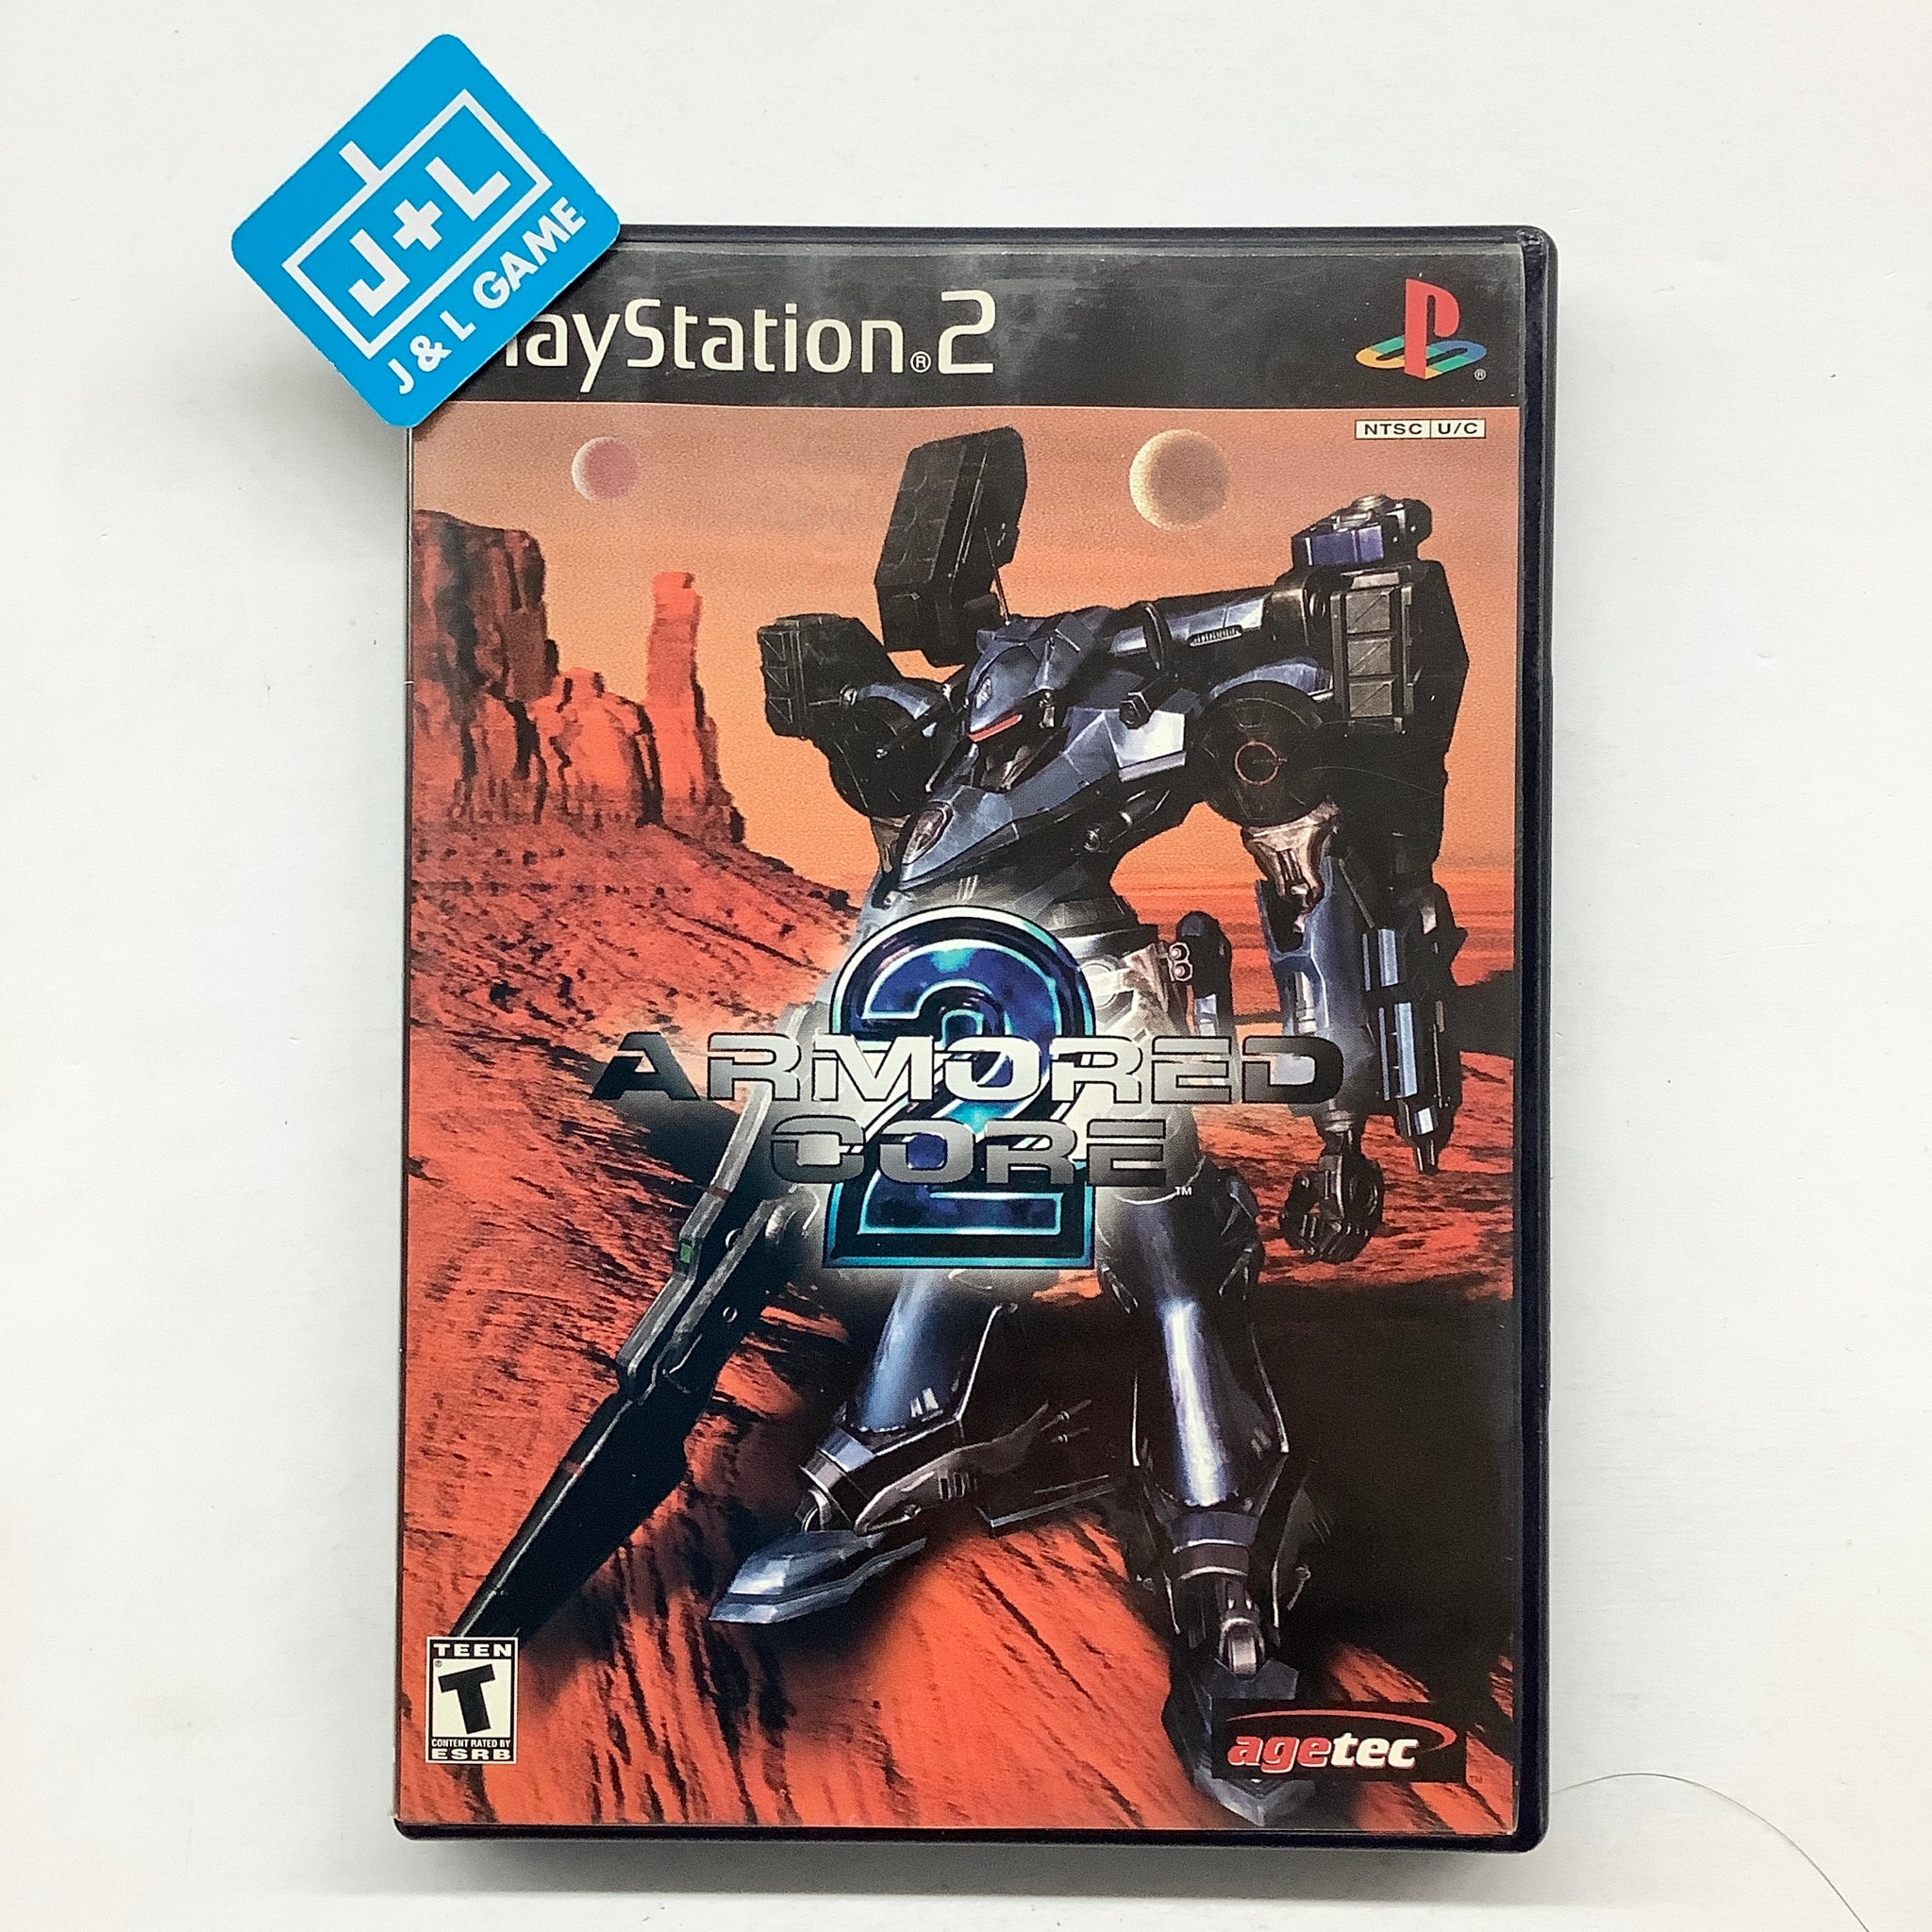 Armored Core 2 (PS2) - The Cover Project